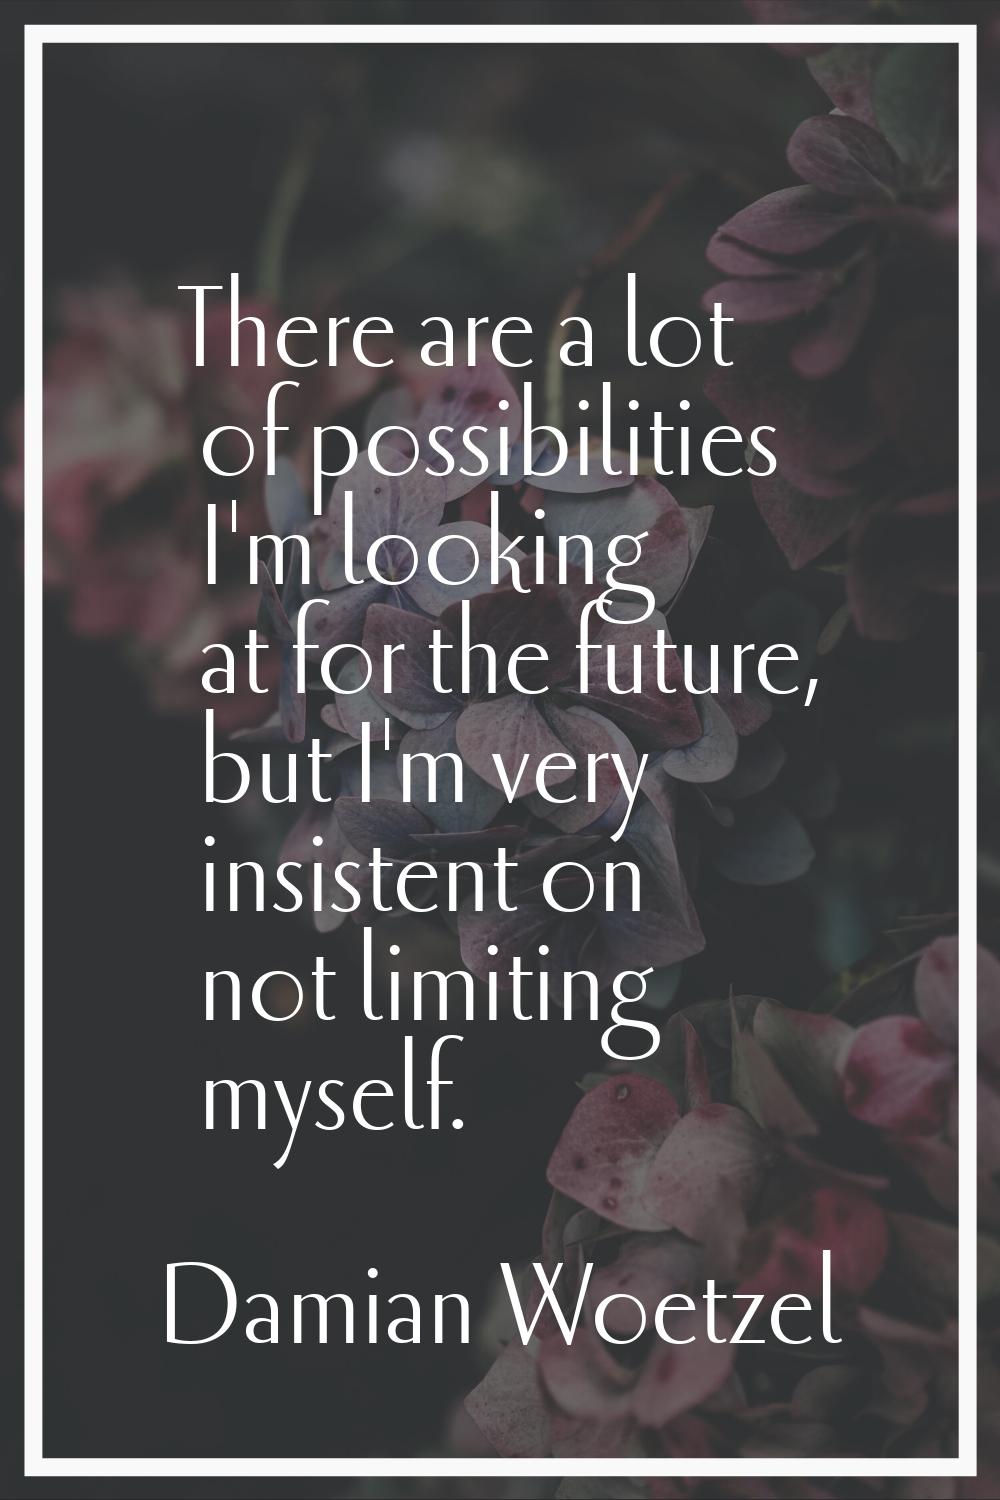 There are a lot of possibilities I'm looking at for the future, but I'm very insistent on not limit